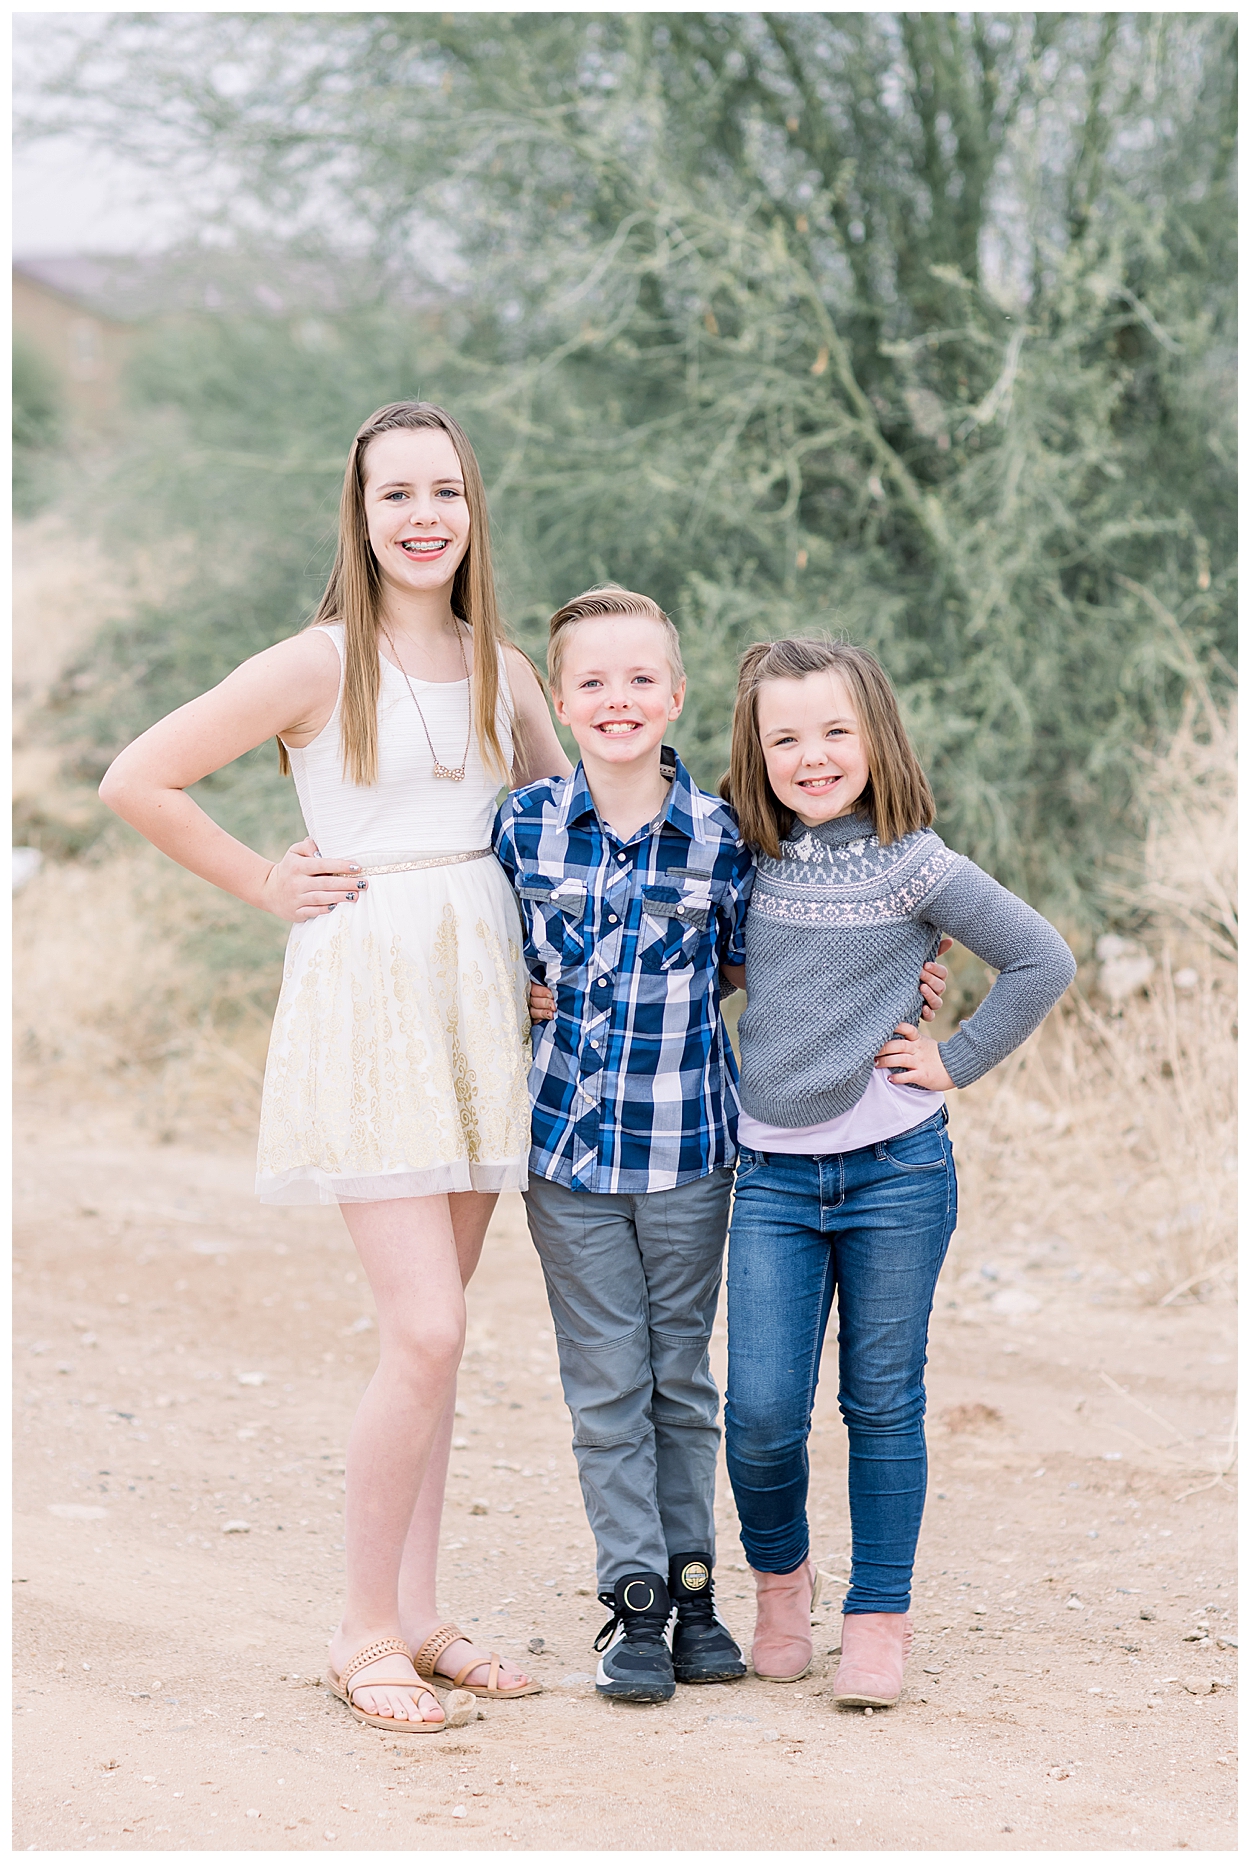 Cromer Family Pictures, Husband and Wife Picture, Desert Family Session, Navy, Burgundy, Kids Christmas